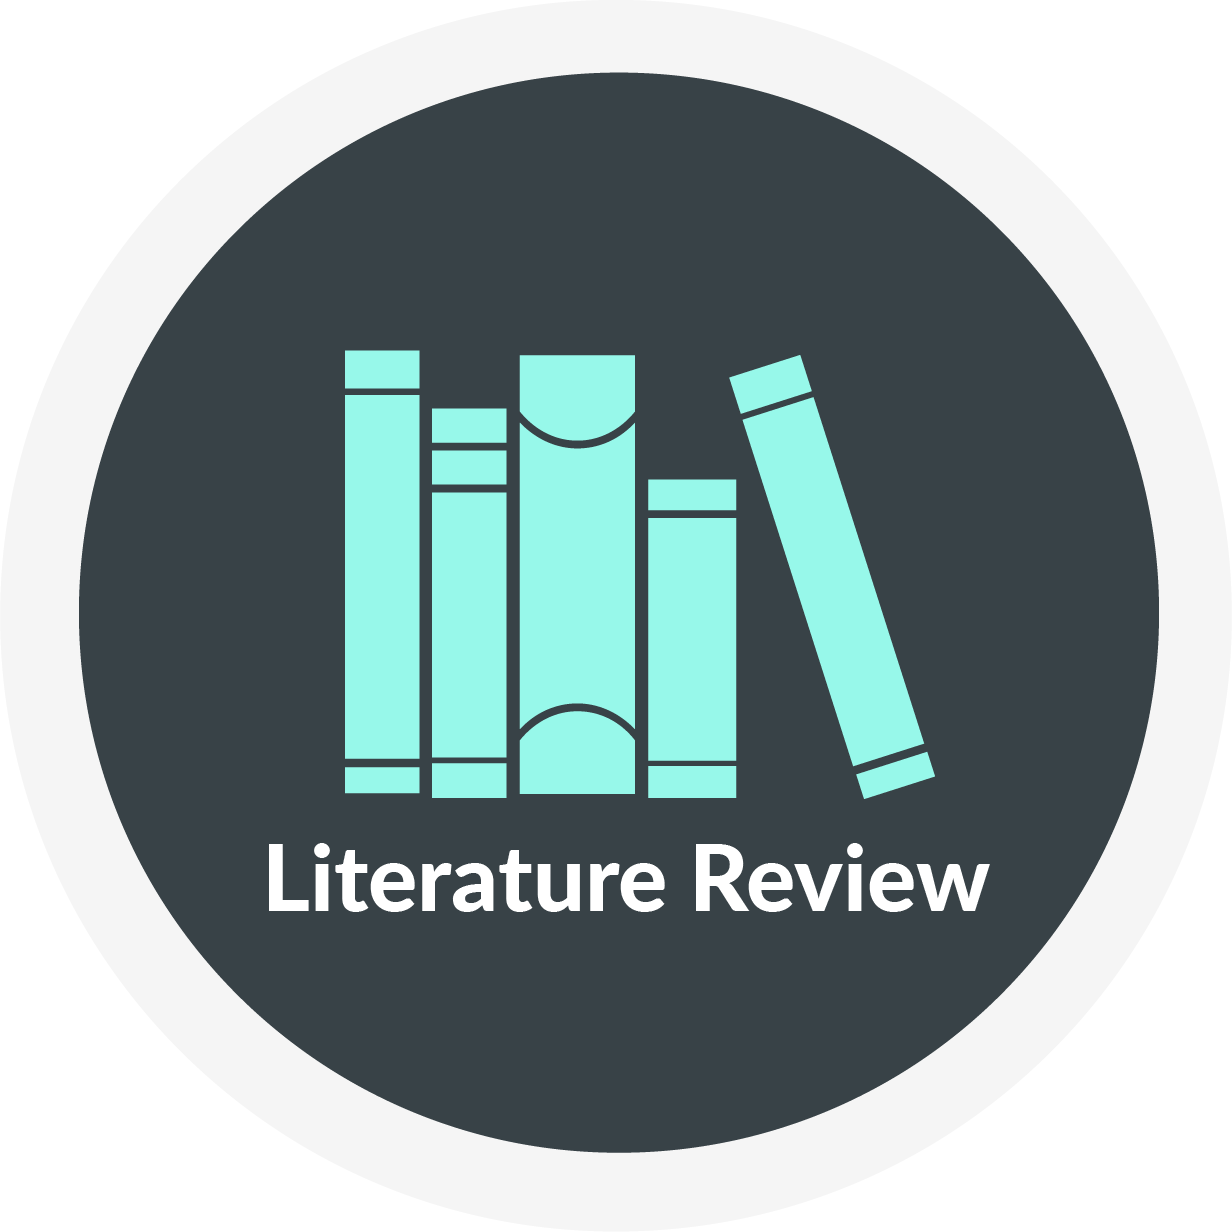 Literature Review Icon@4x.png